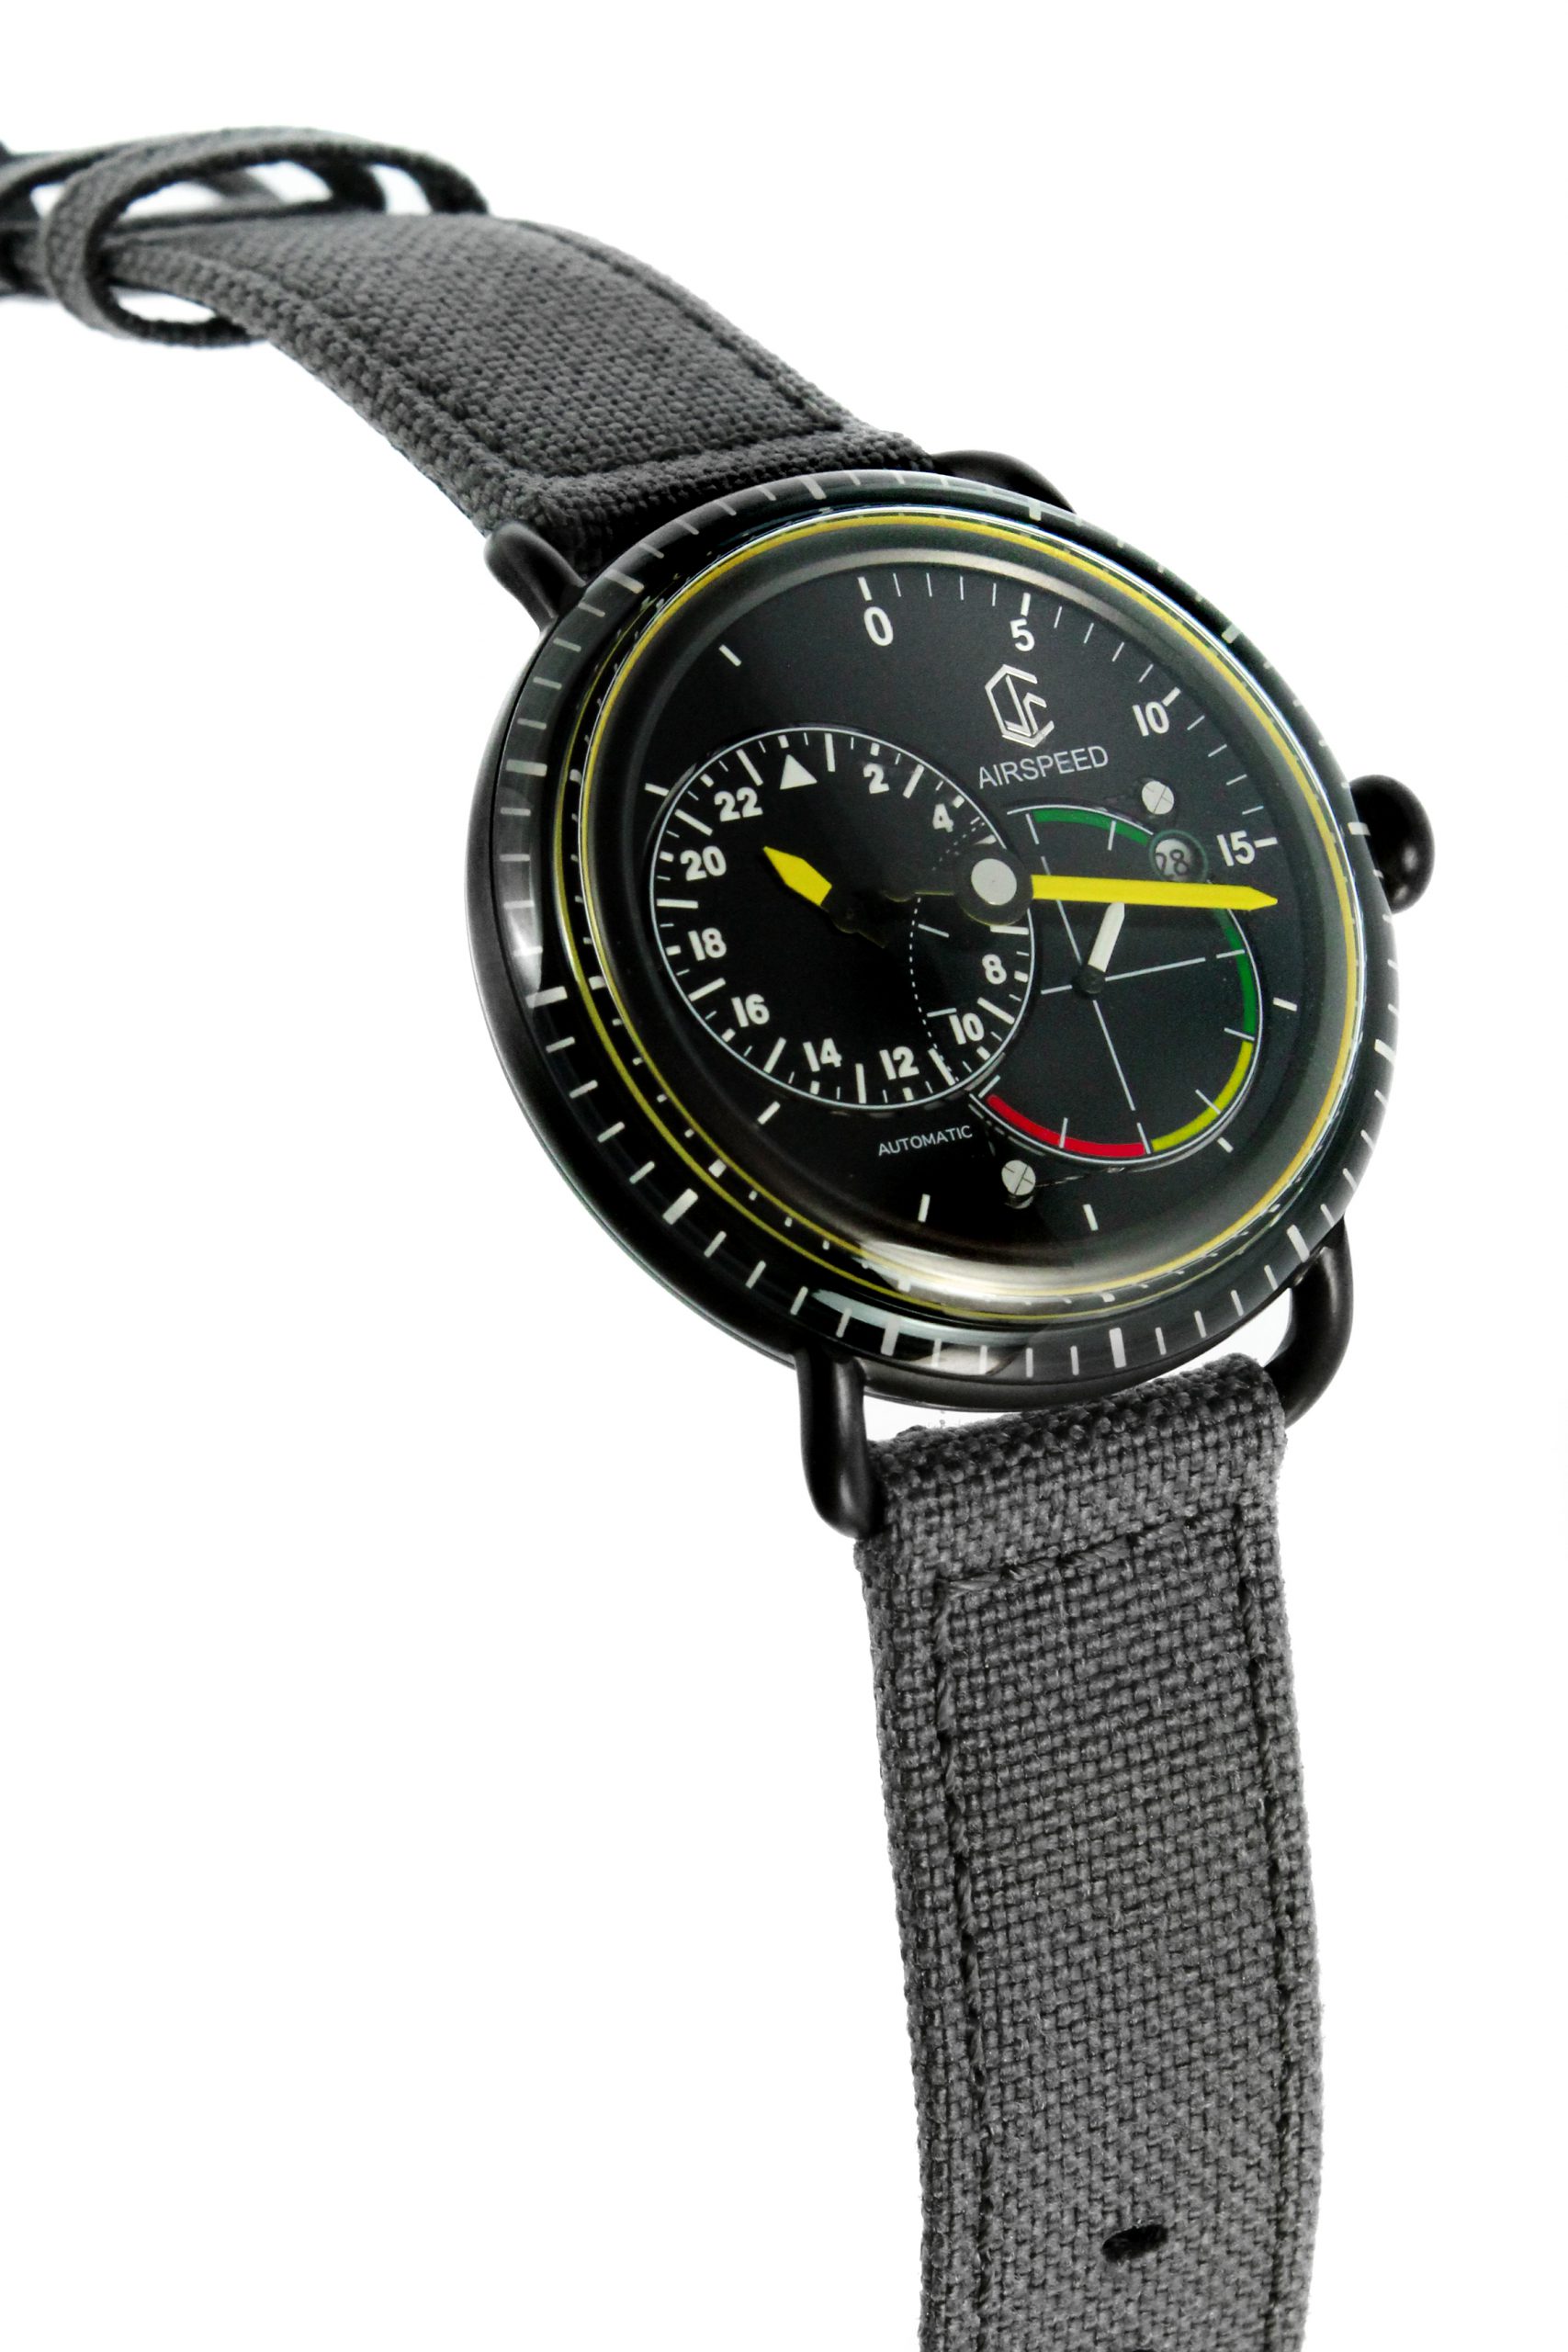 Details more than 135 airspeed watch latest